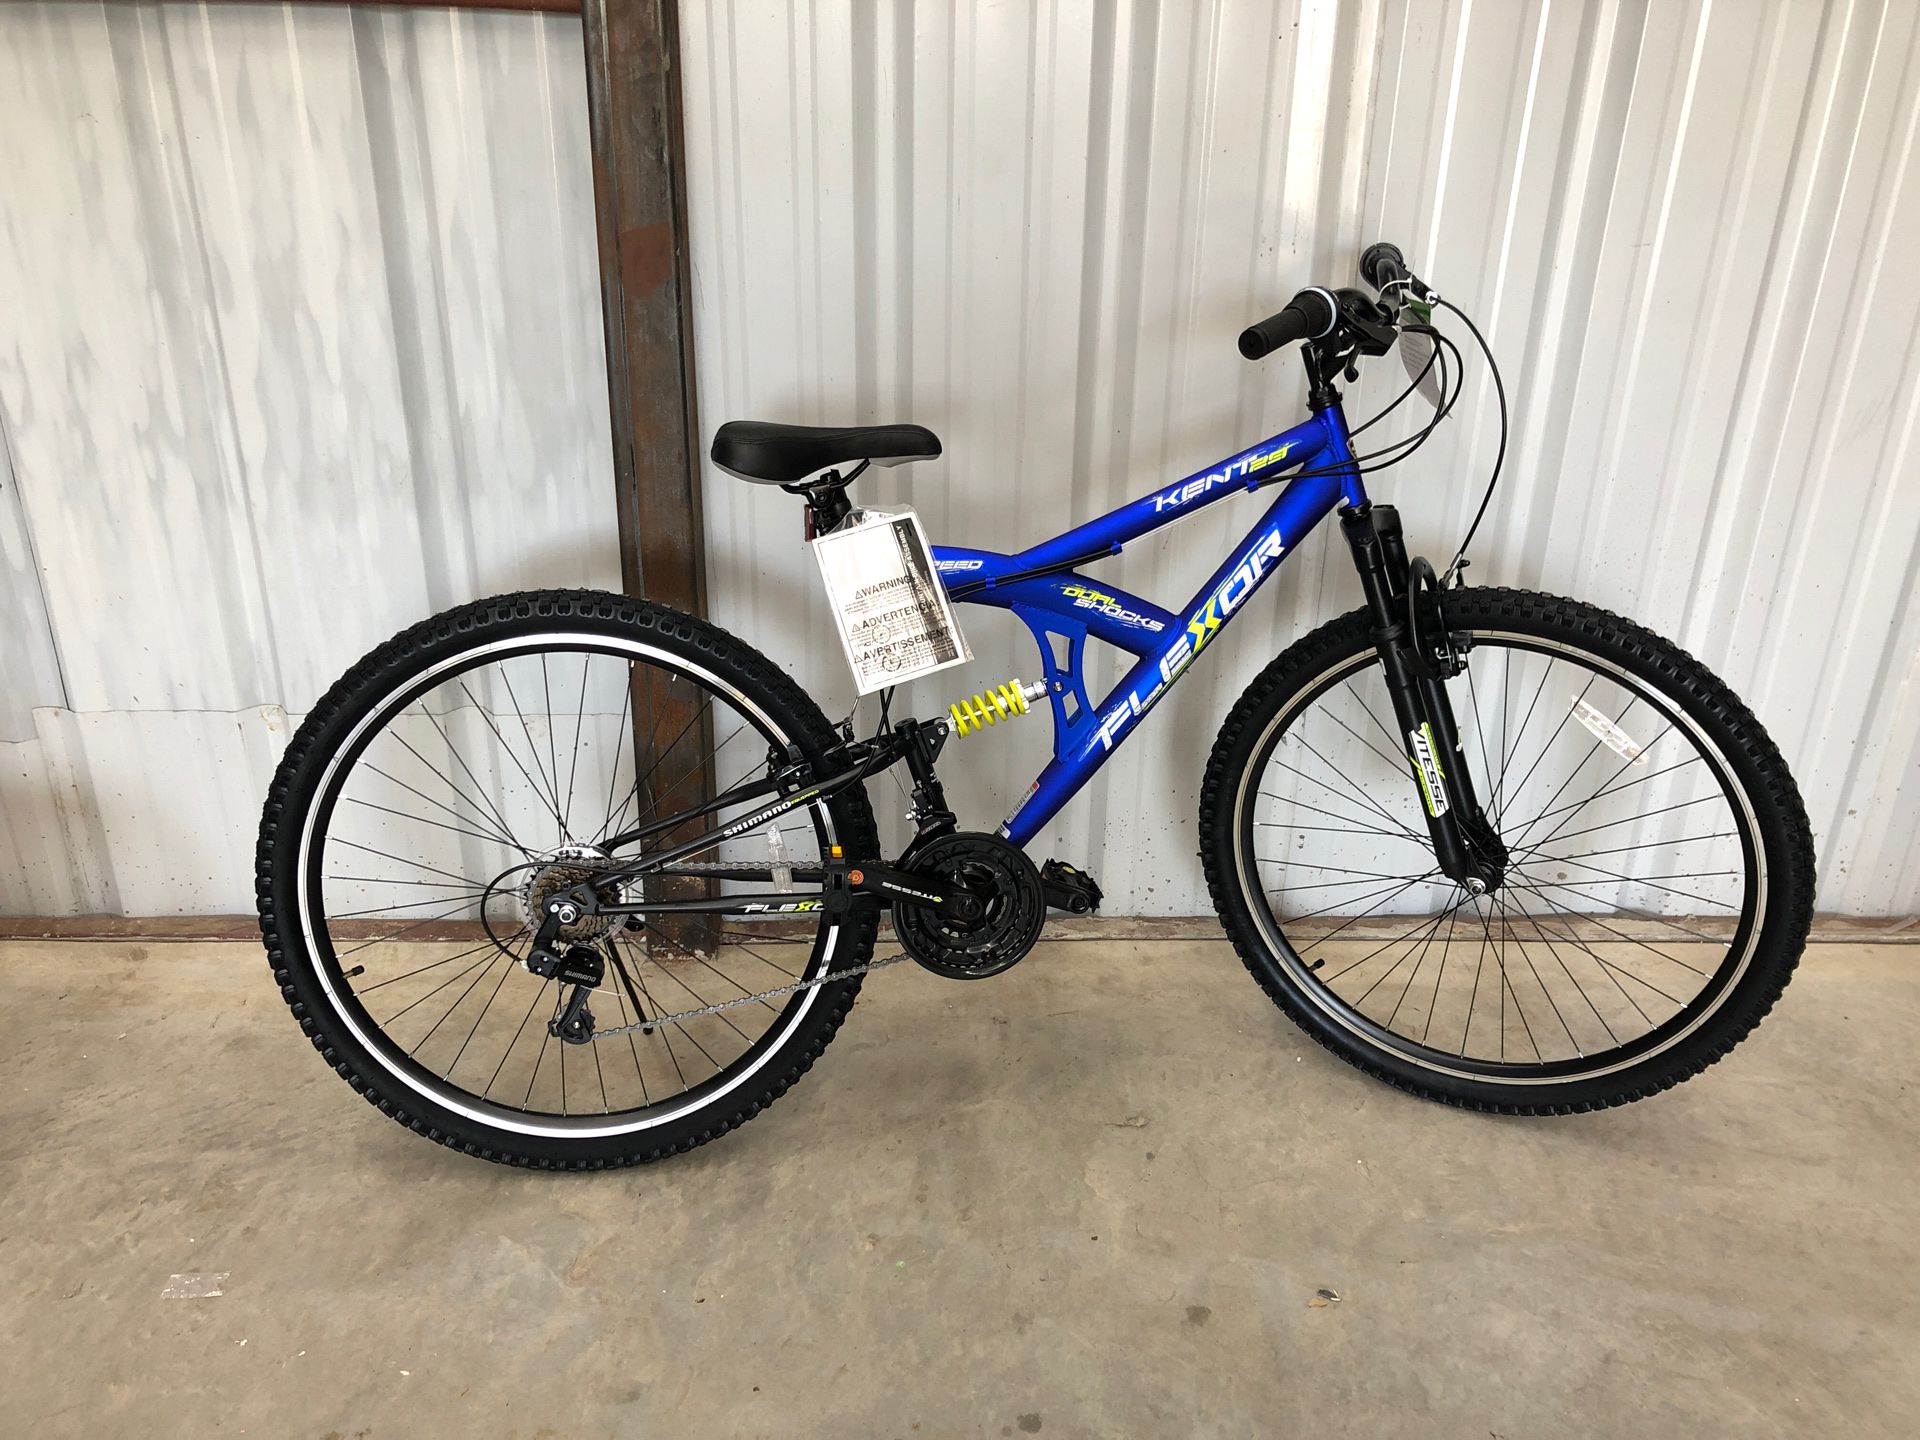 29” mountain bikes with gear